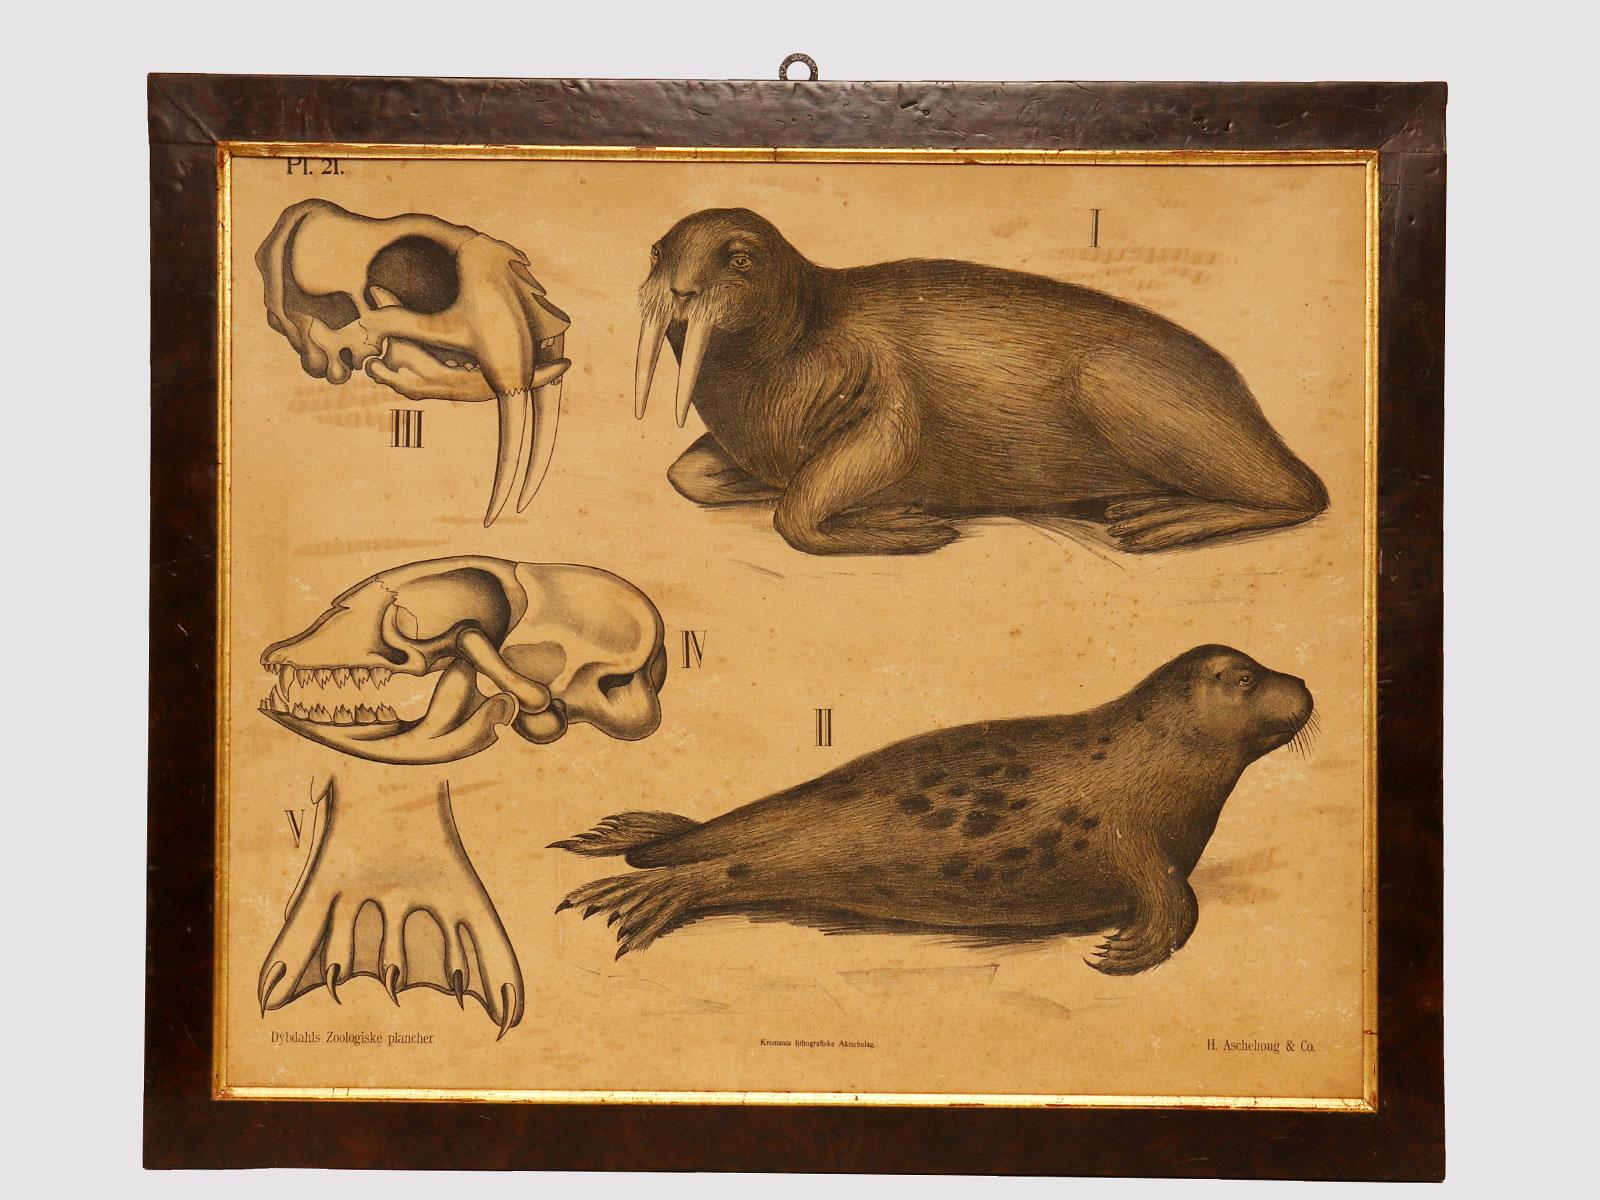 A chromolithographic print on paper by P. Dybdahls, depicting an anatomical table (Pl. 21) of marine mammals. Fir wood frame, walnut briar veneer, with gilded ramin wood edge. H. Aschehoug & co, P.M. Bye & co. Kristiania, Norway, late 19th century.